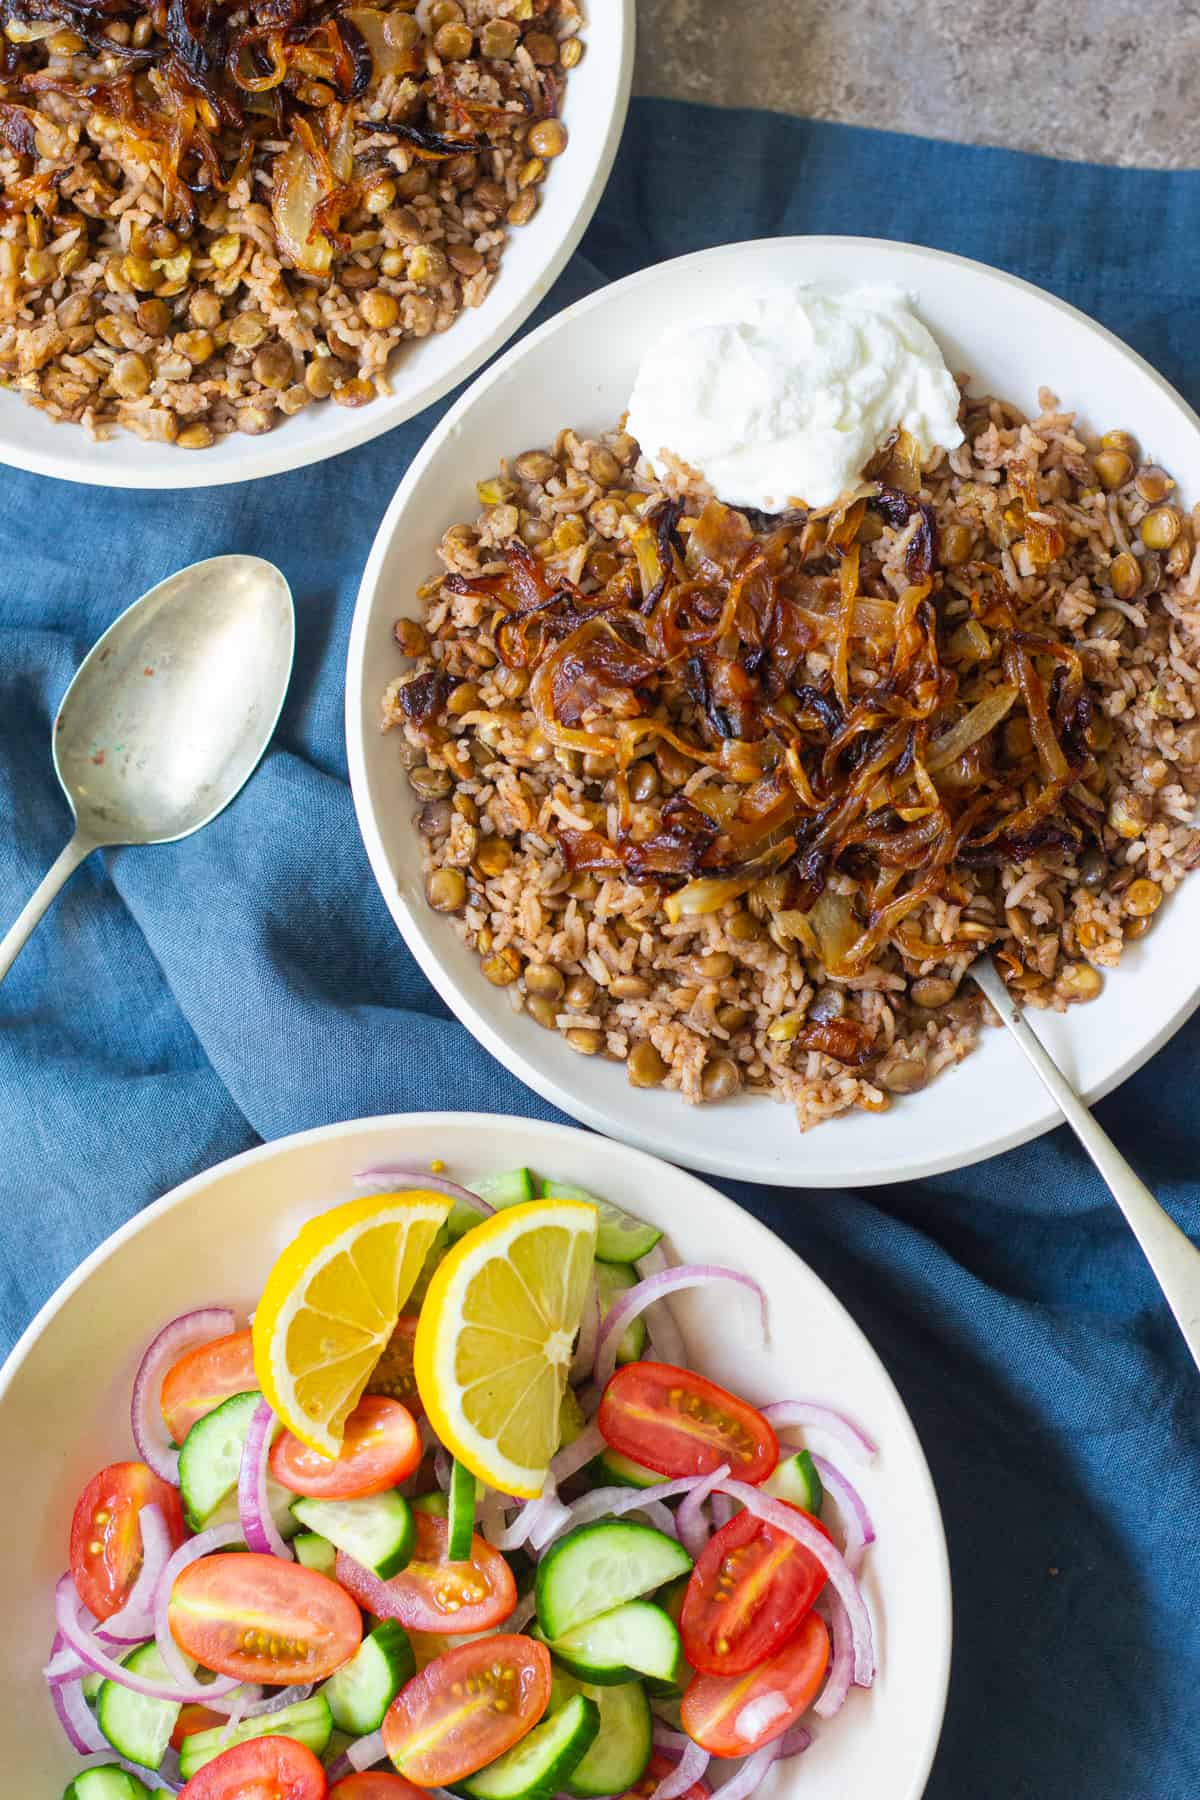 Mujadara is a simple Lebanese lentil and rice dish with crispy onions that's packed with flavor. This lentils and rice recipe calls for only a few ingredients and is very easy to make.
